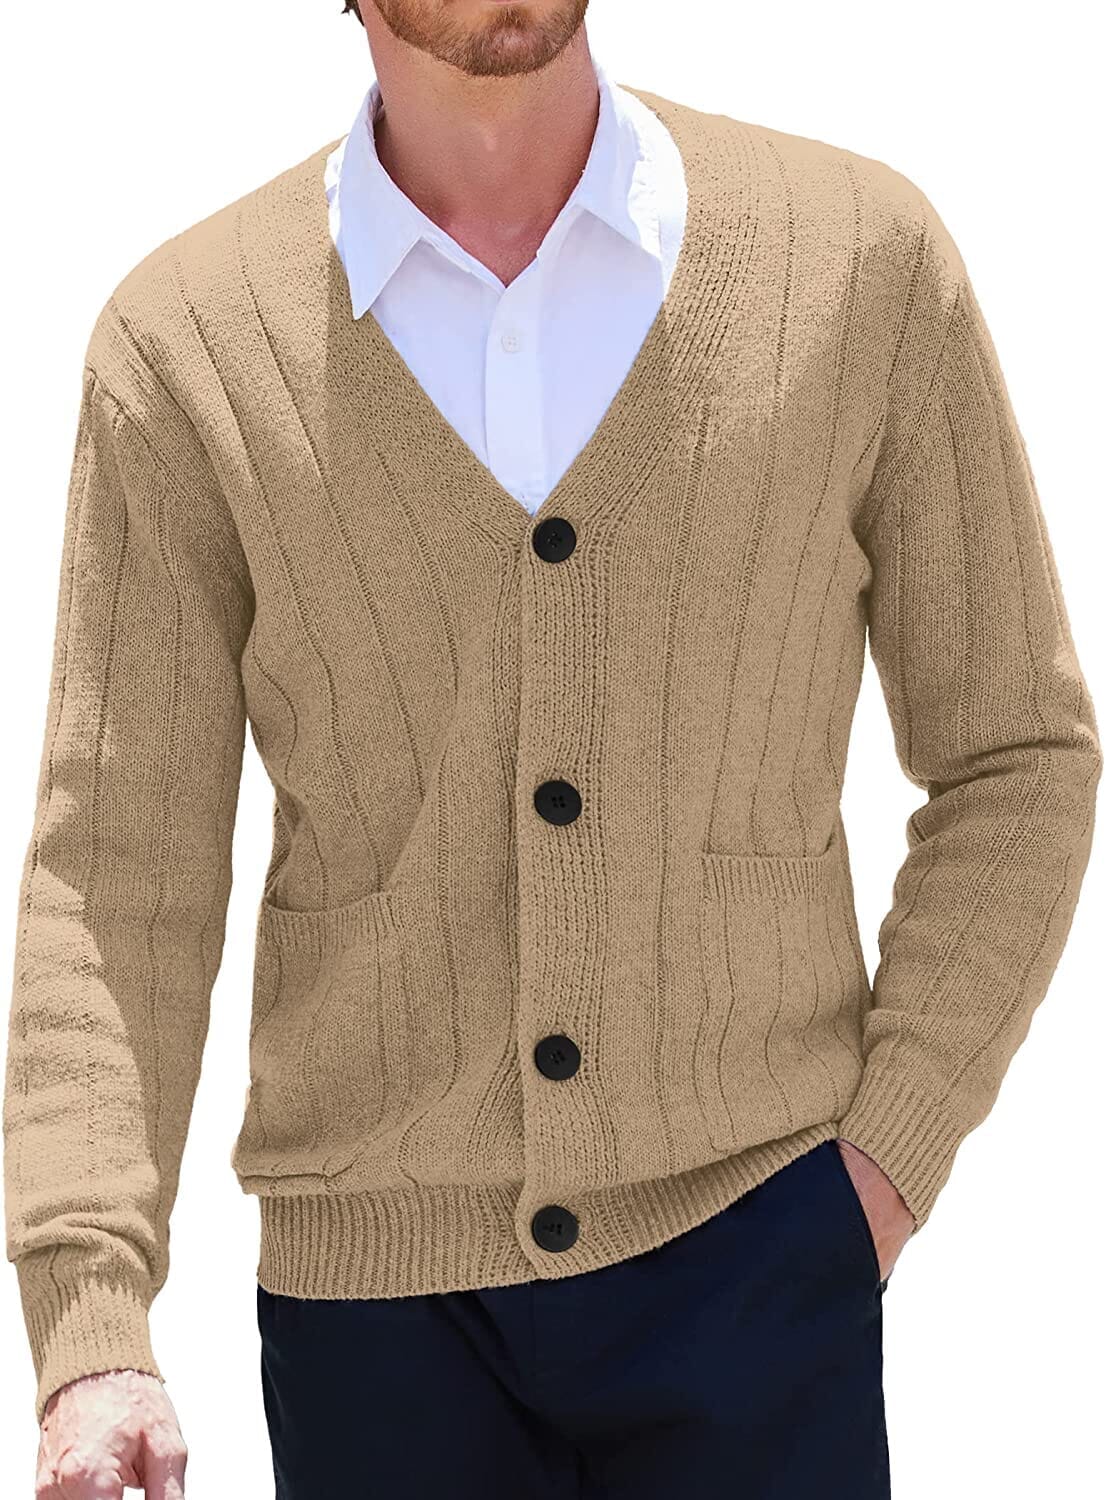 Cardigan Knit V Neck Button up Sweaters (US Only) Sweaters COOFANDY Store Khaki S 